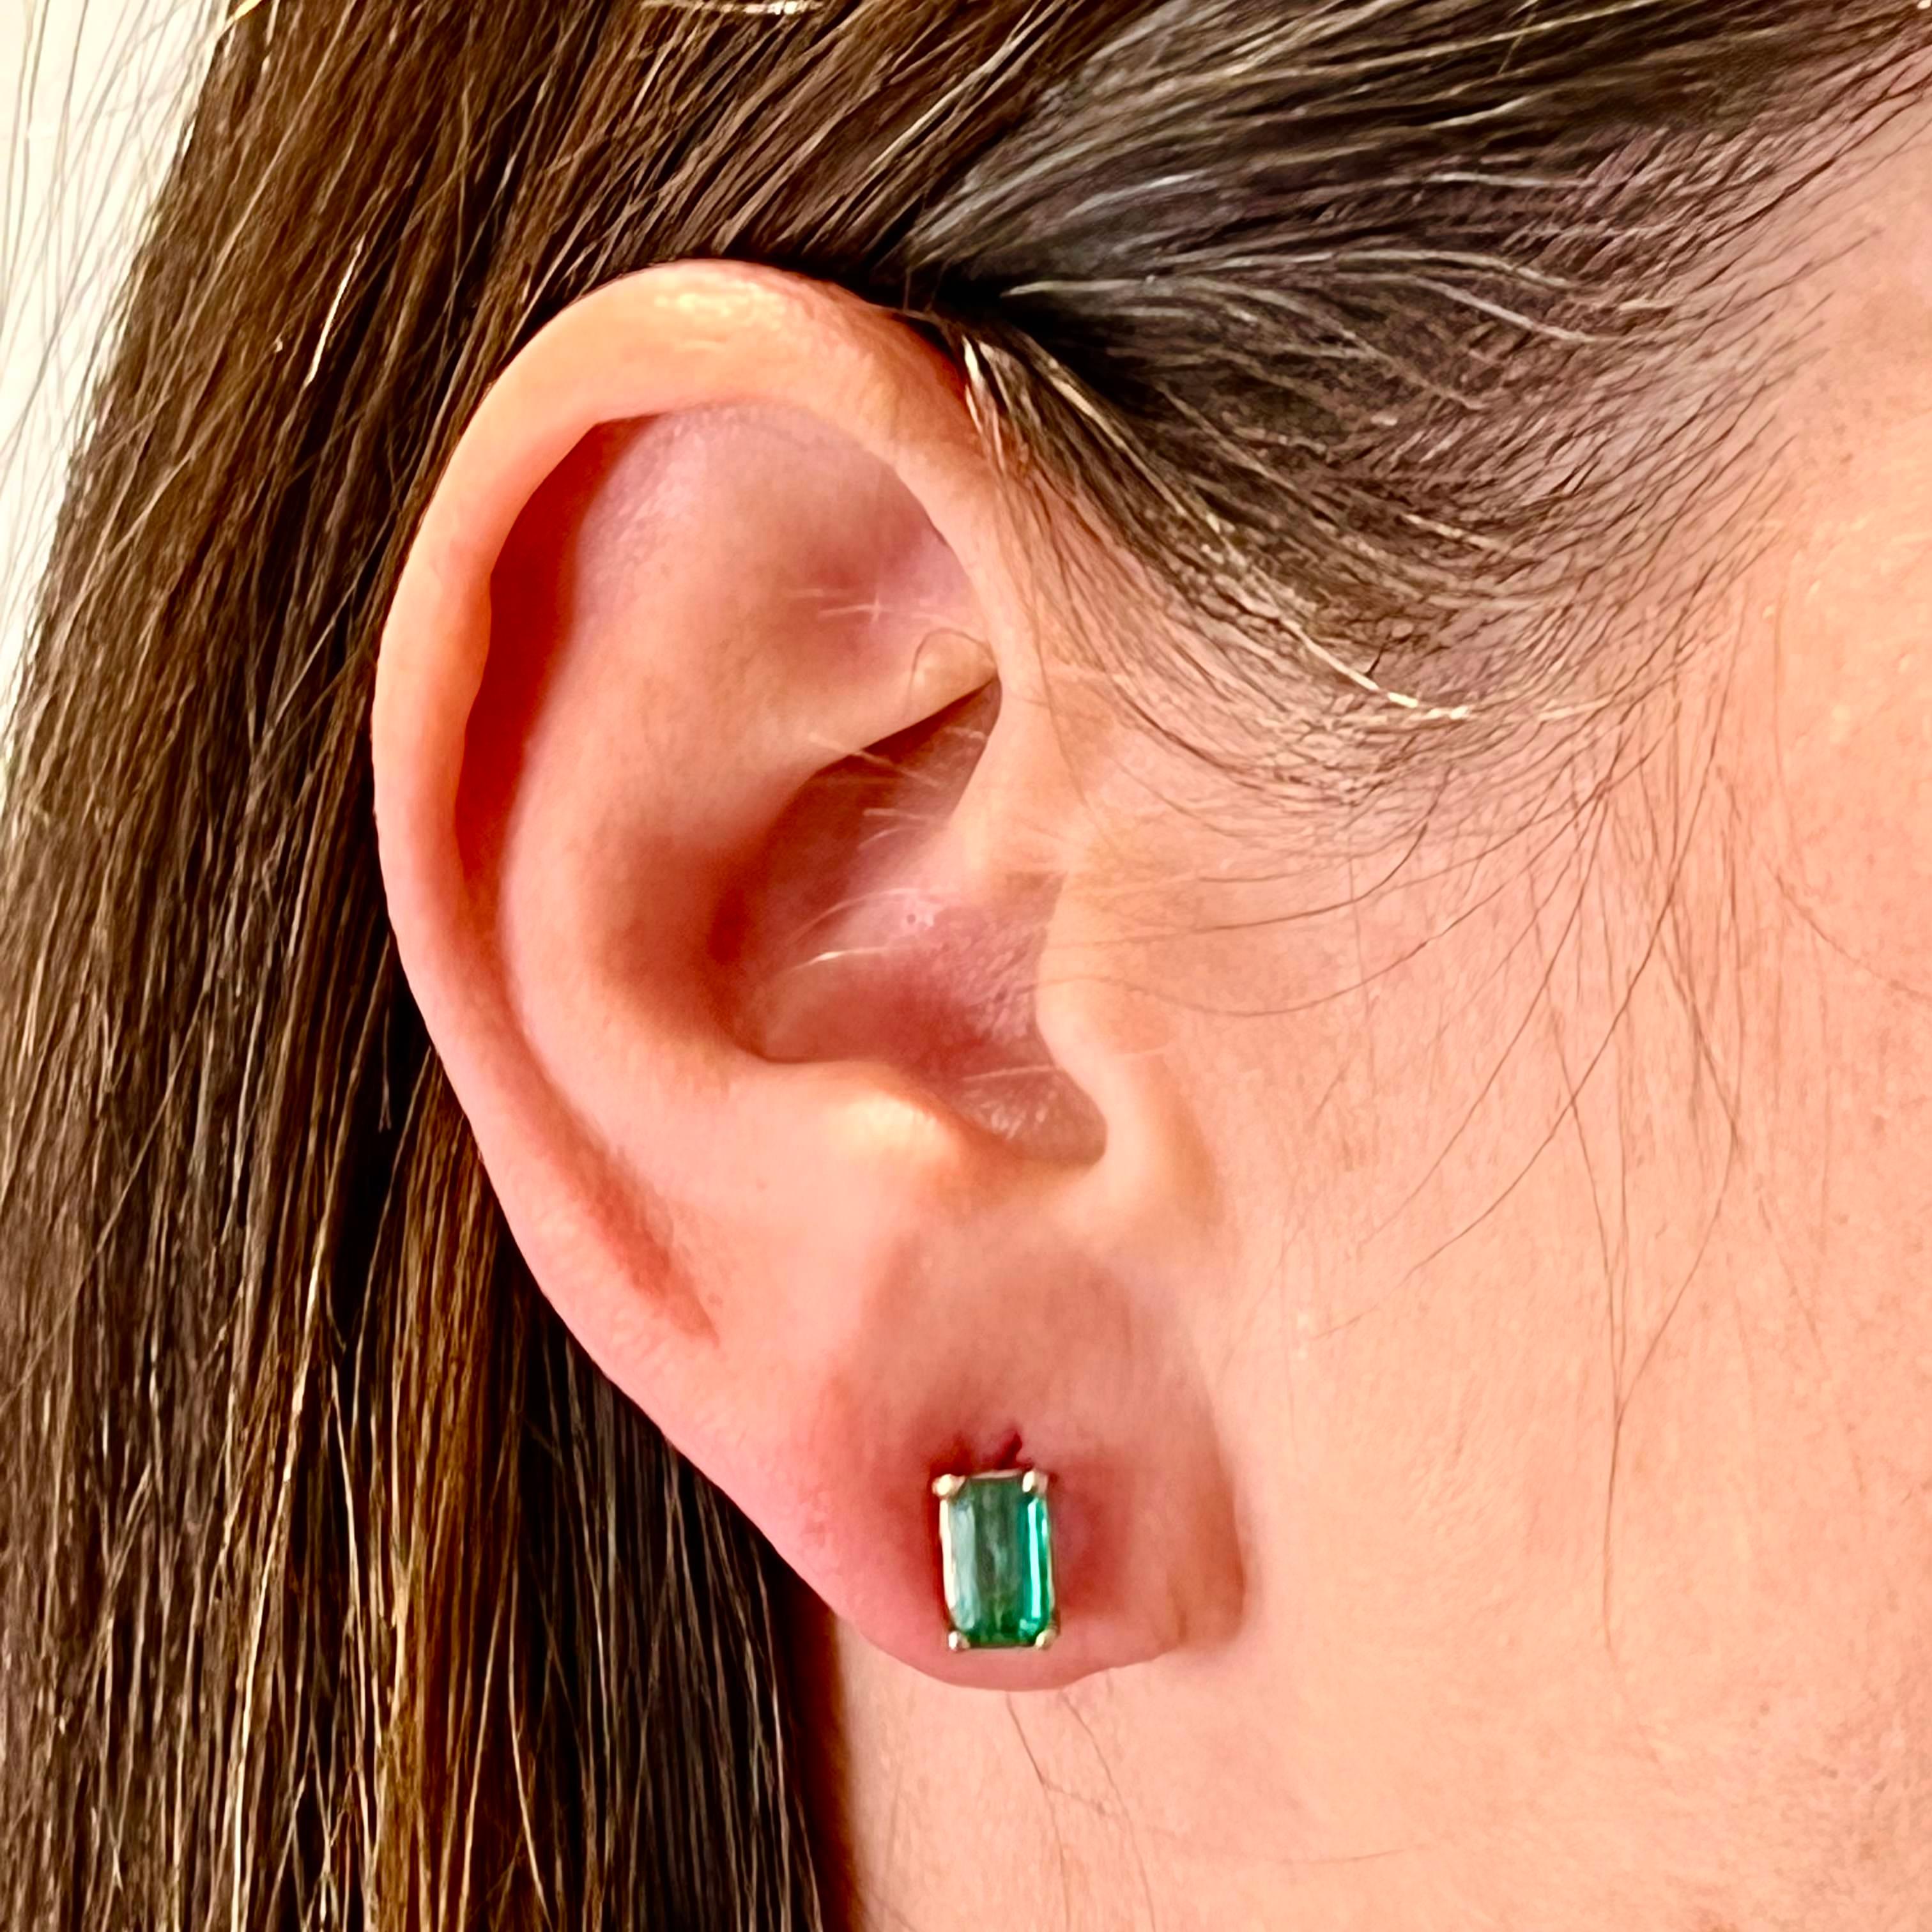 Natural Finely Faceted Quality Emerald Stud Earrings 14k White Gold 1.25 Cts Certified $3,490 215625

This is a Unique Custom Made Glamorous Piece of Jewelry!

Nothing says, “I Love you” more than Diamonds and Pearls!

This pair of Emerald has been